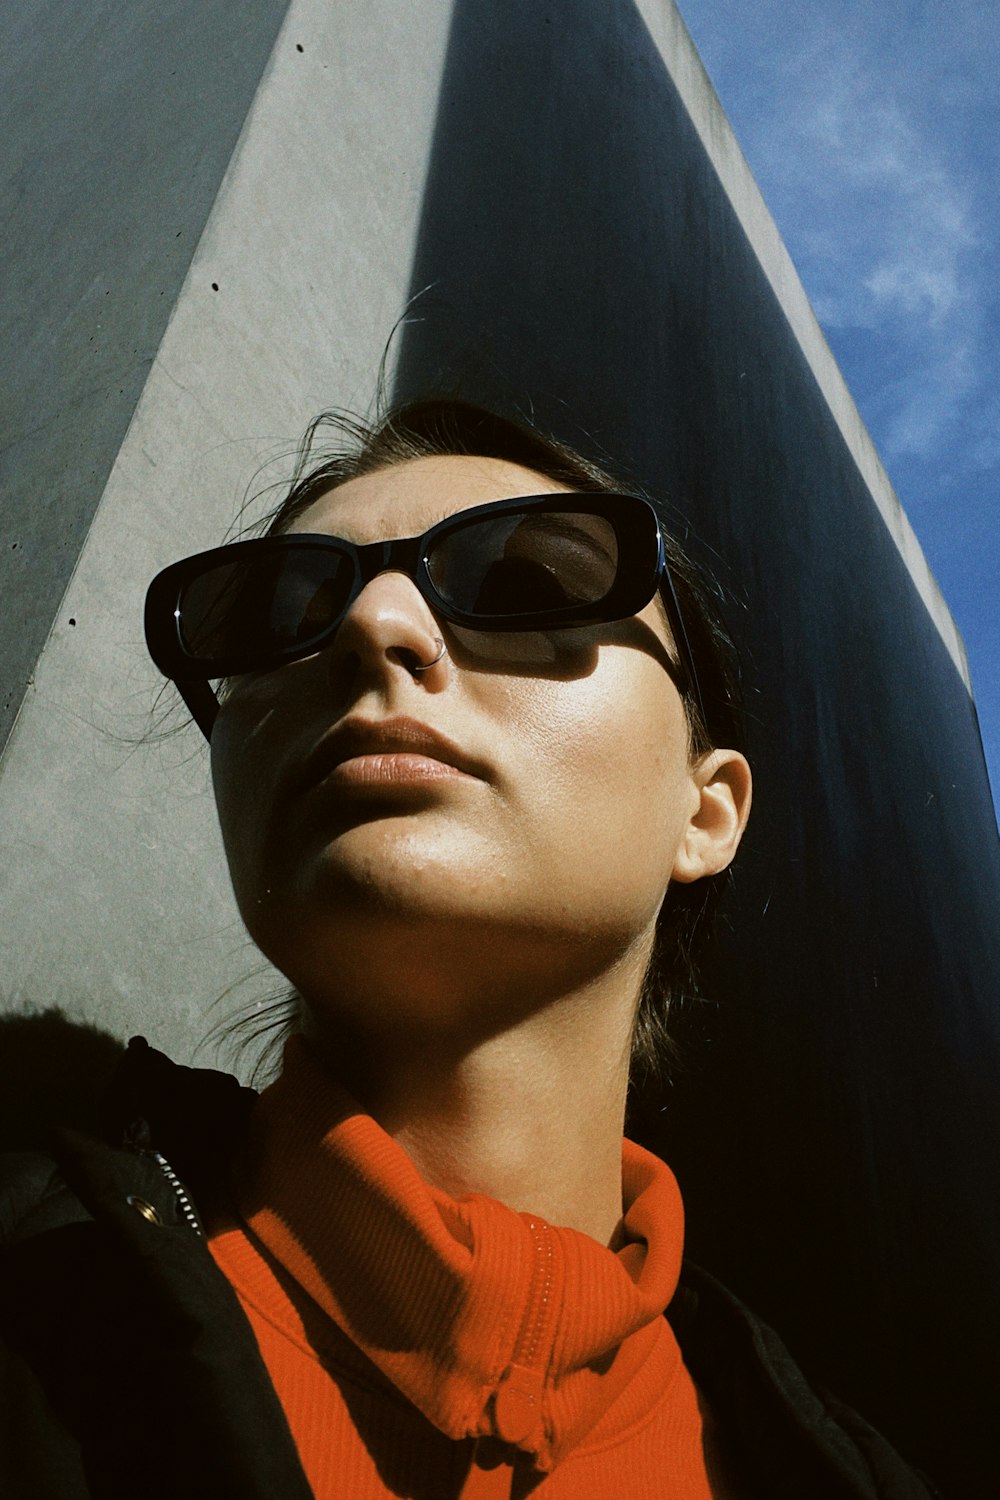 a woman wearing sunglasses standing in front of a tall building